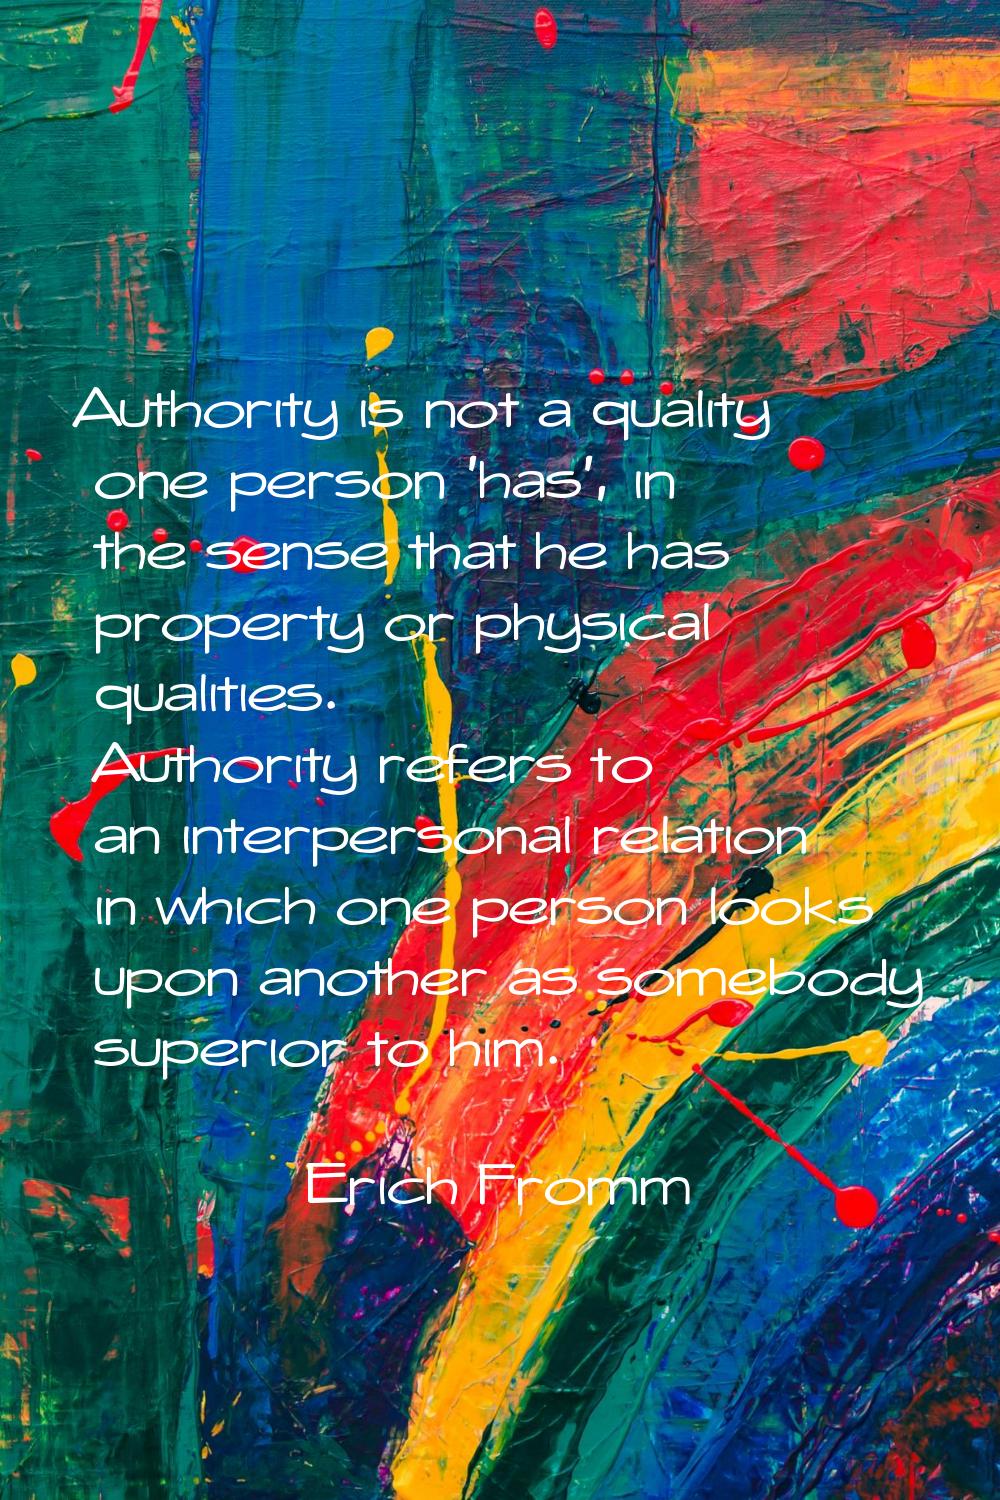 Authority is not a quality one person 'has', in the sense that he has property or physical qualitie